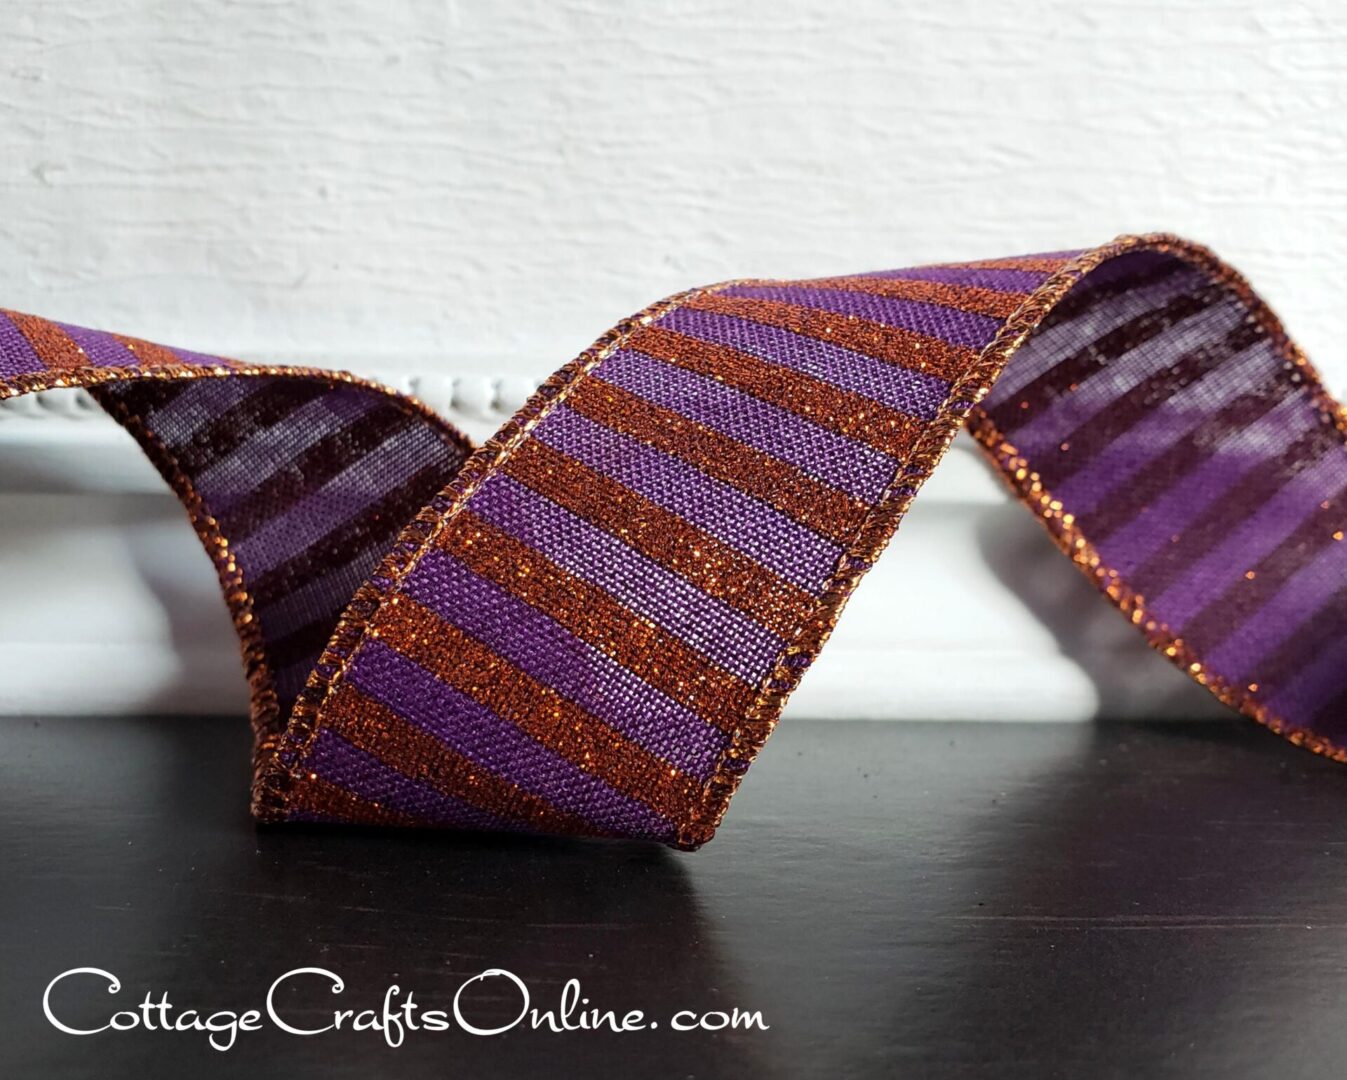 Orange glitter horizontal stripes on purple mesh 1.5" wide wired ribbon from the Etsy shop of Cottage Crafts Online.